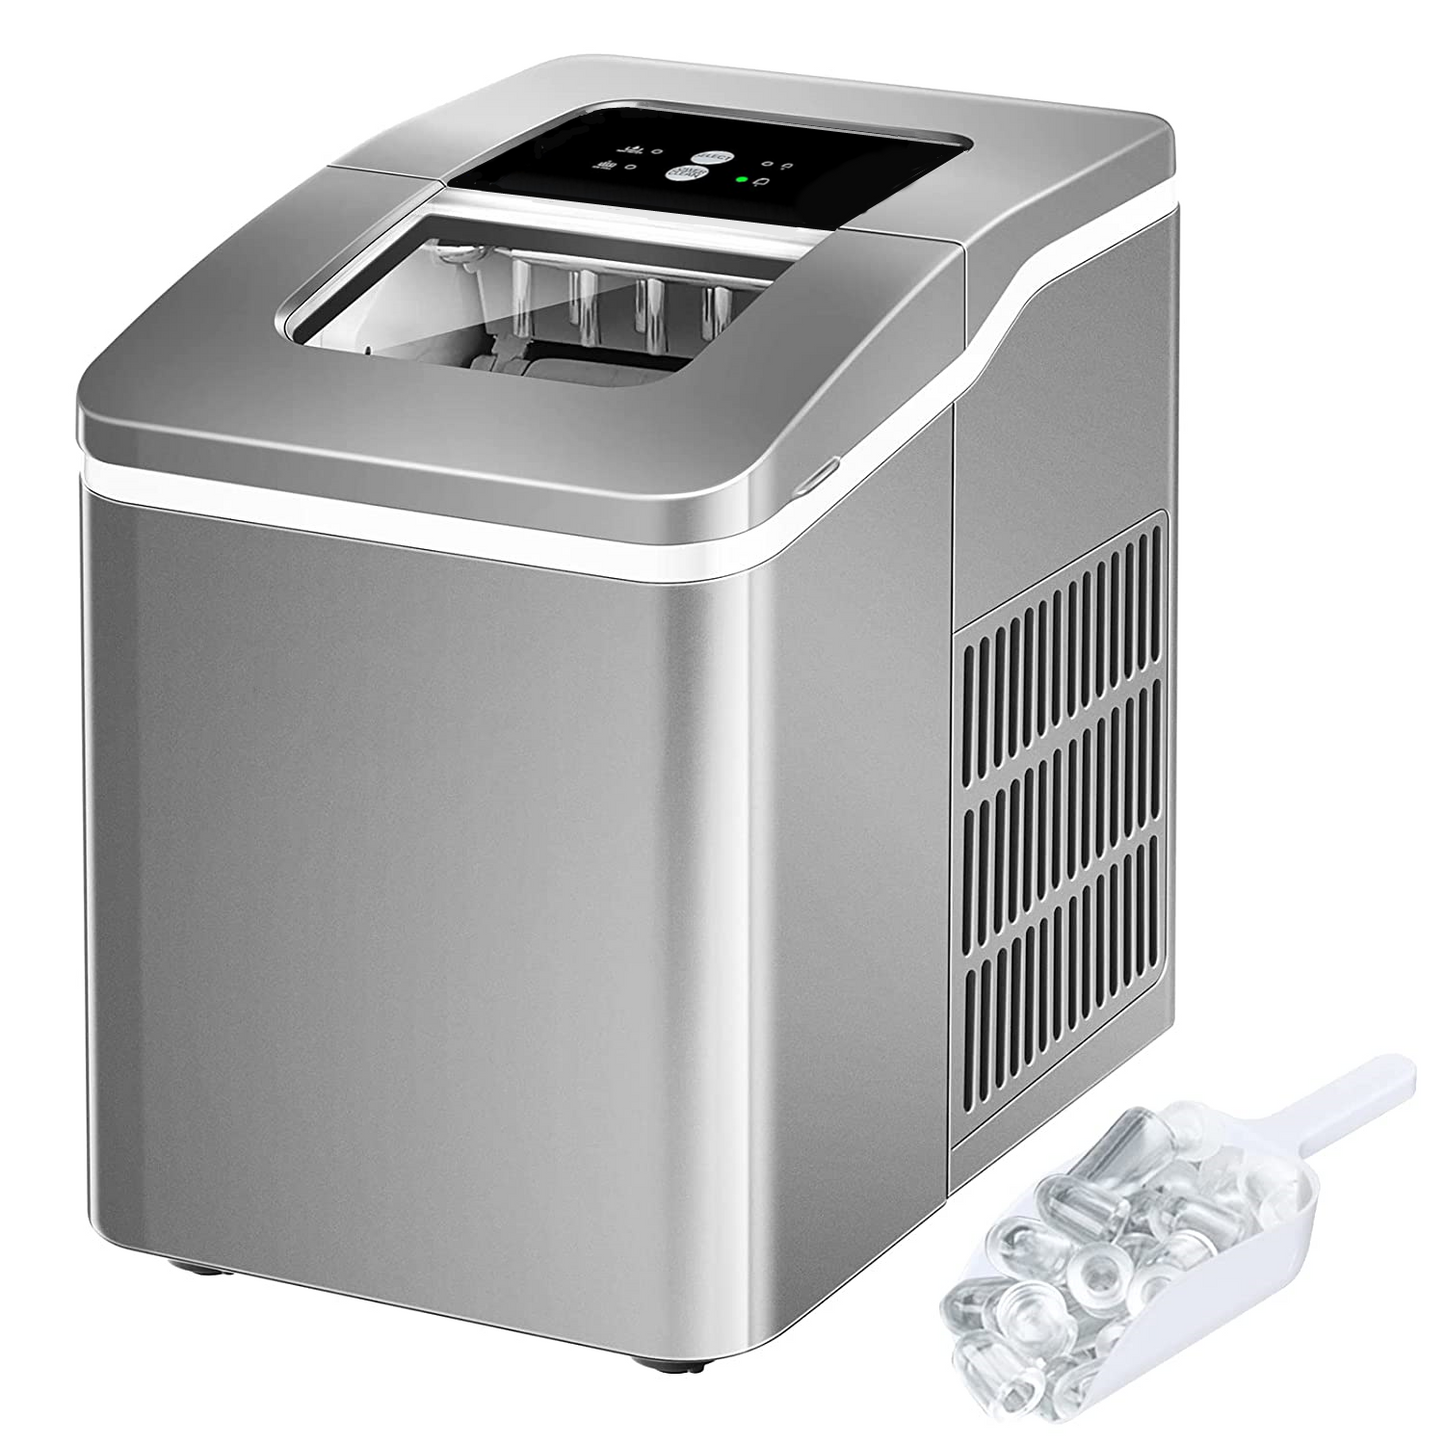 Ice Maker Machine Countertop, 28 lbs in 24 Hrs, 9 Cubes Ready in 5 Mins, 2 Ice Sizes, Portable Ice Maker 2 L with Self-clean, LCD Display, Ice Scoop and Basket Perfect for Home/Kitchen/Office (Silver)